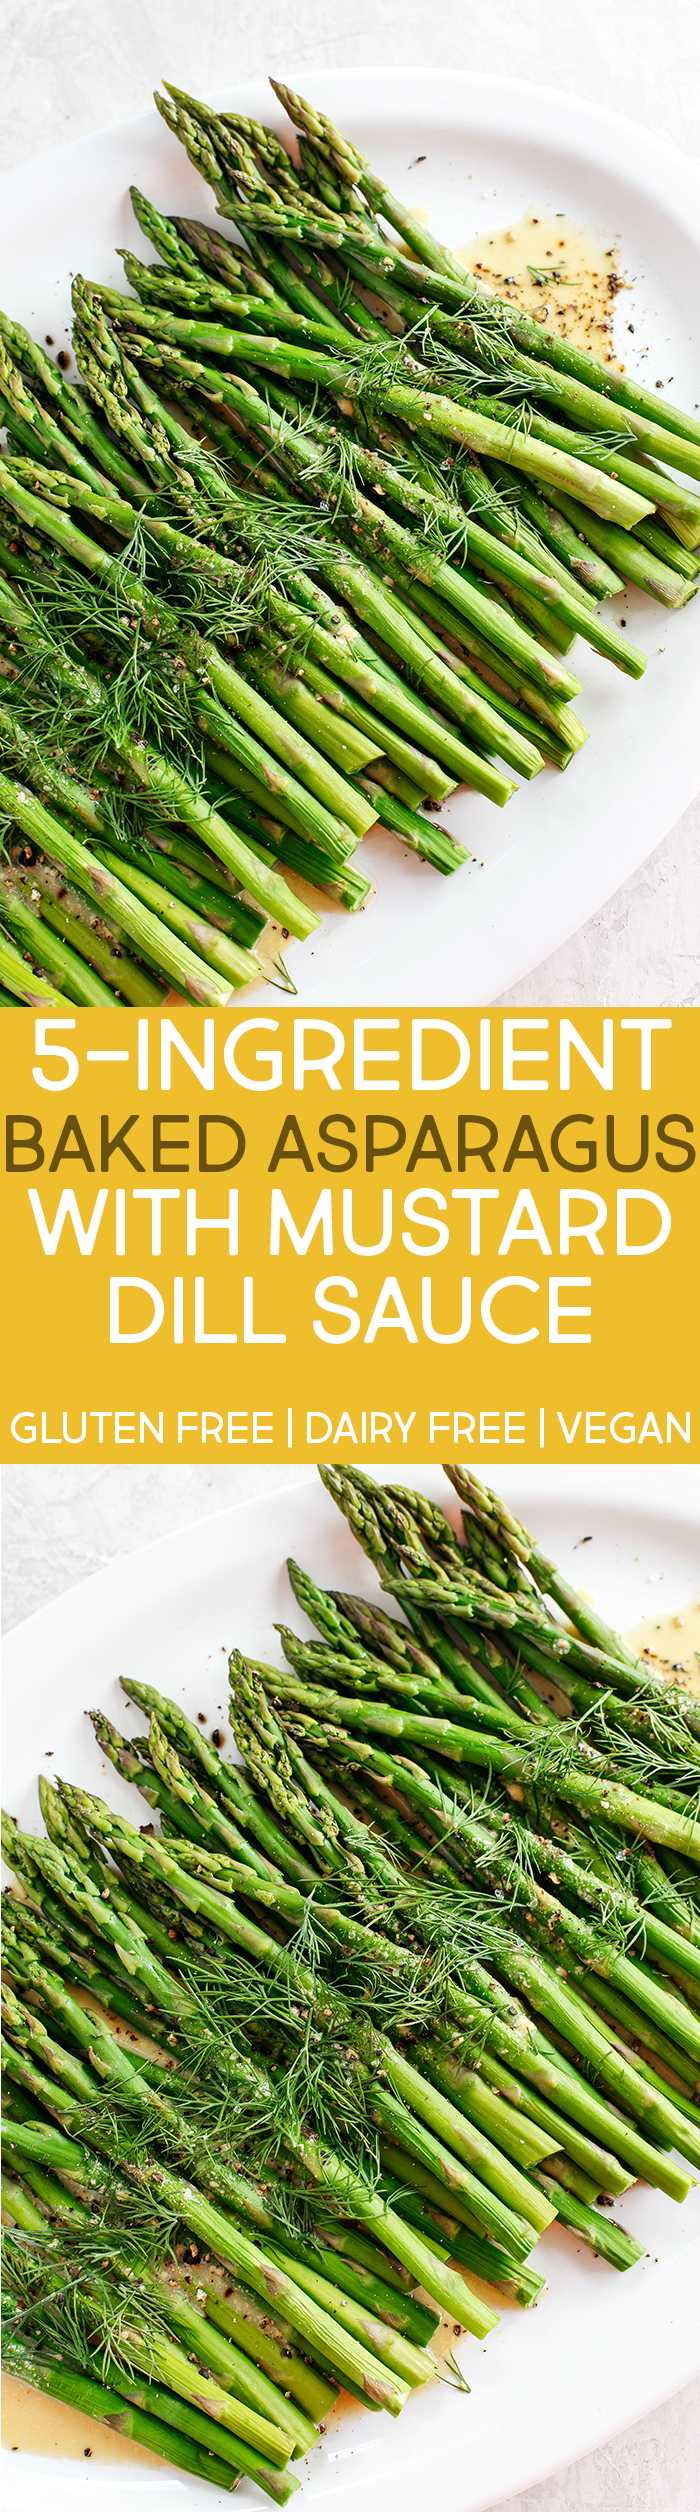 Baked Asparagus with delicious Mustard Dill Sauce makes the perfect healthy side dish for any meal with just a few simple ingredients!  #vegan #glutenfree